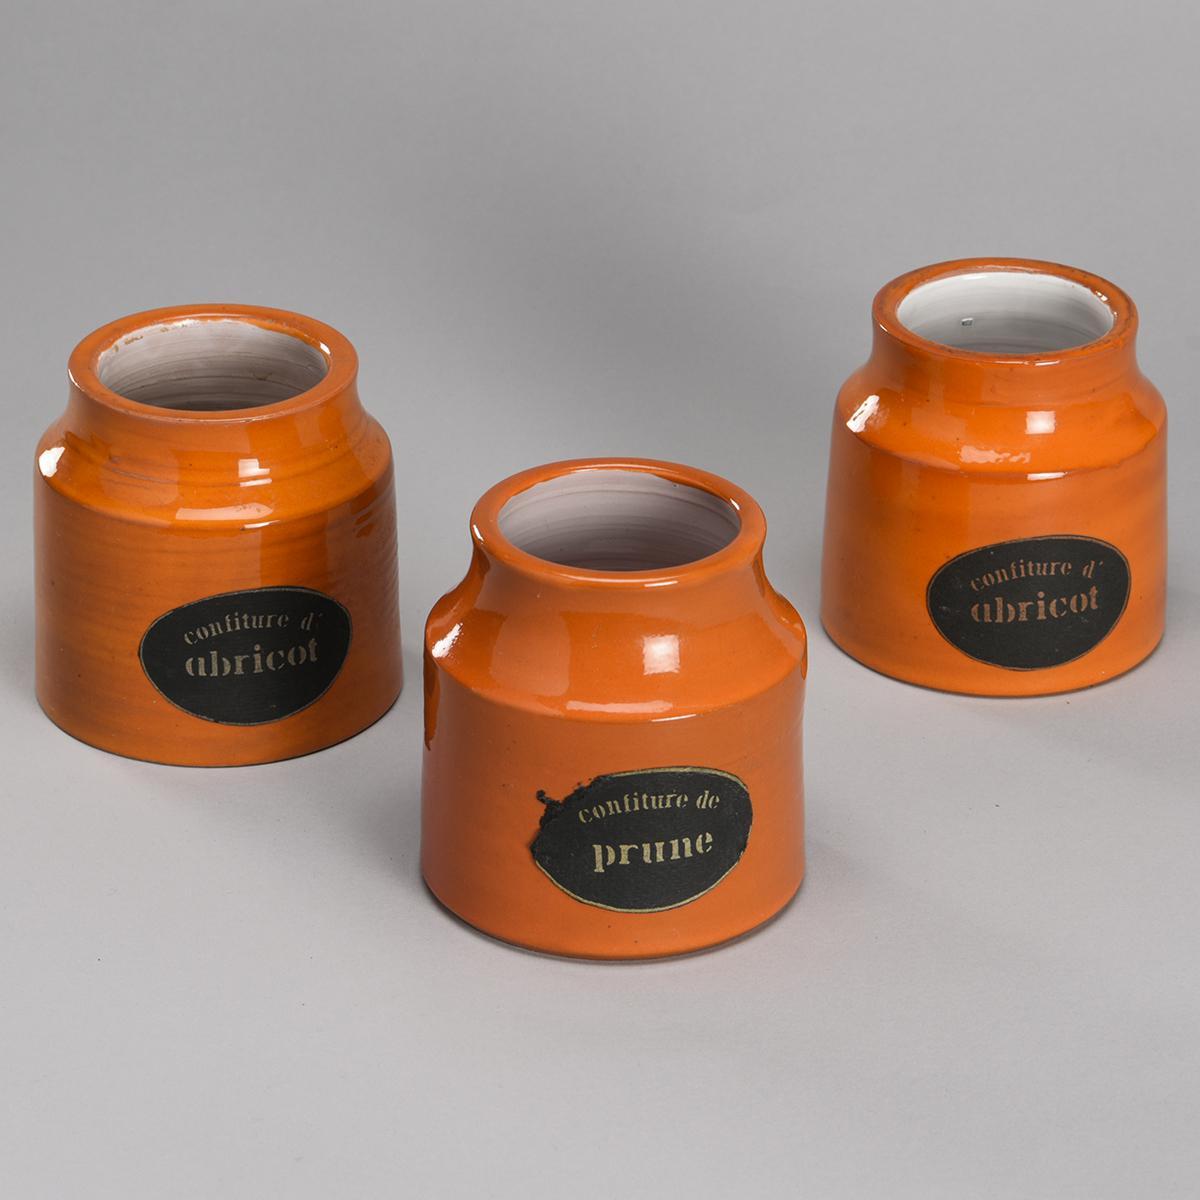 Set of 3 glazed ceramic cylindrical jars with tightened necks with a beautiful orange enamel with their original label 